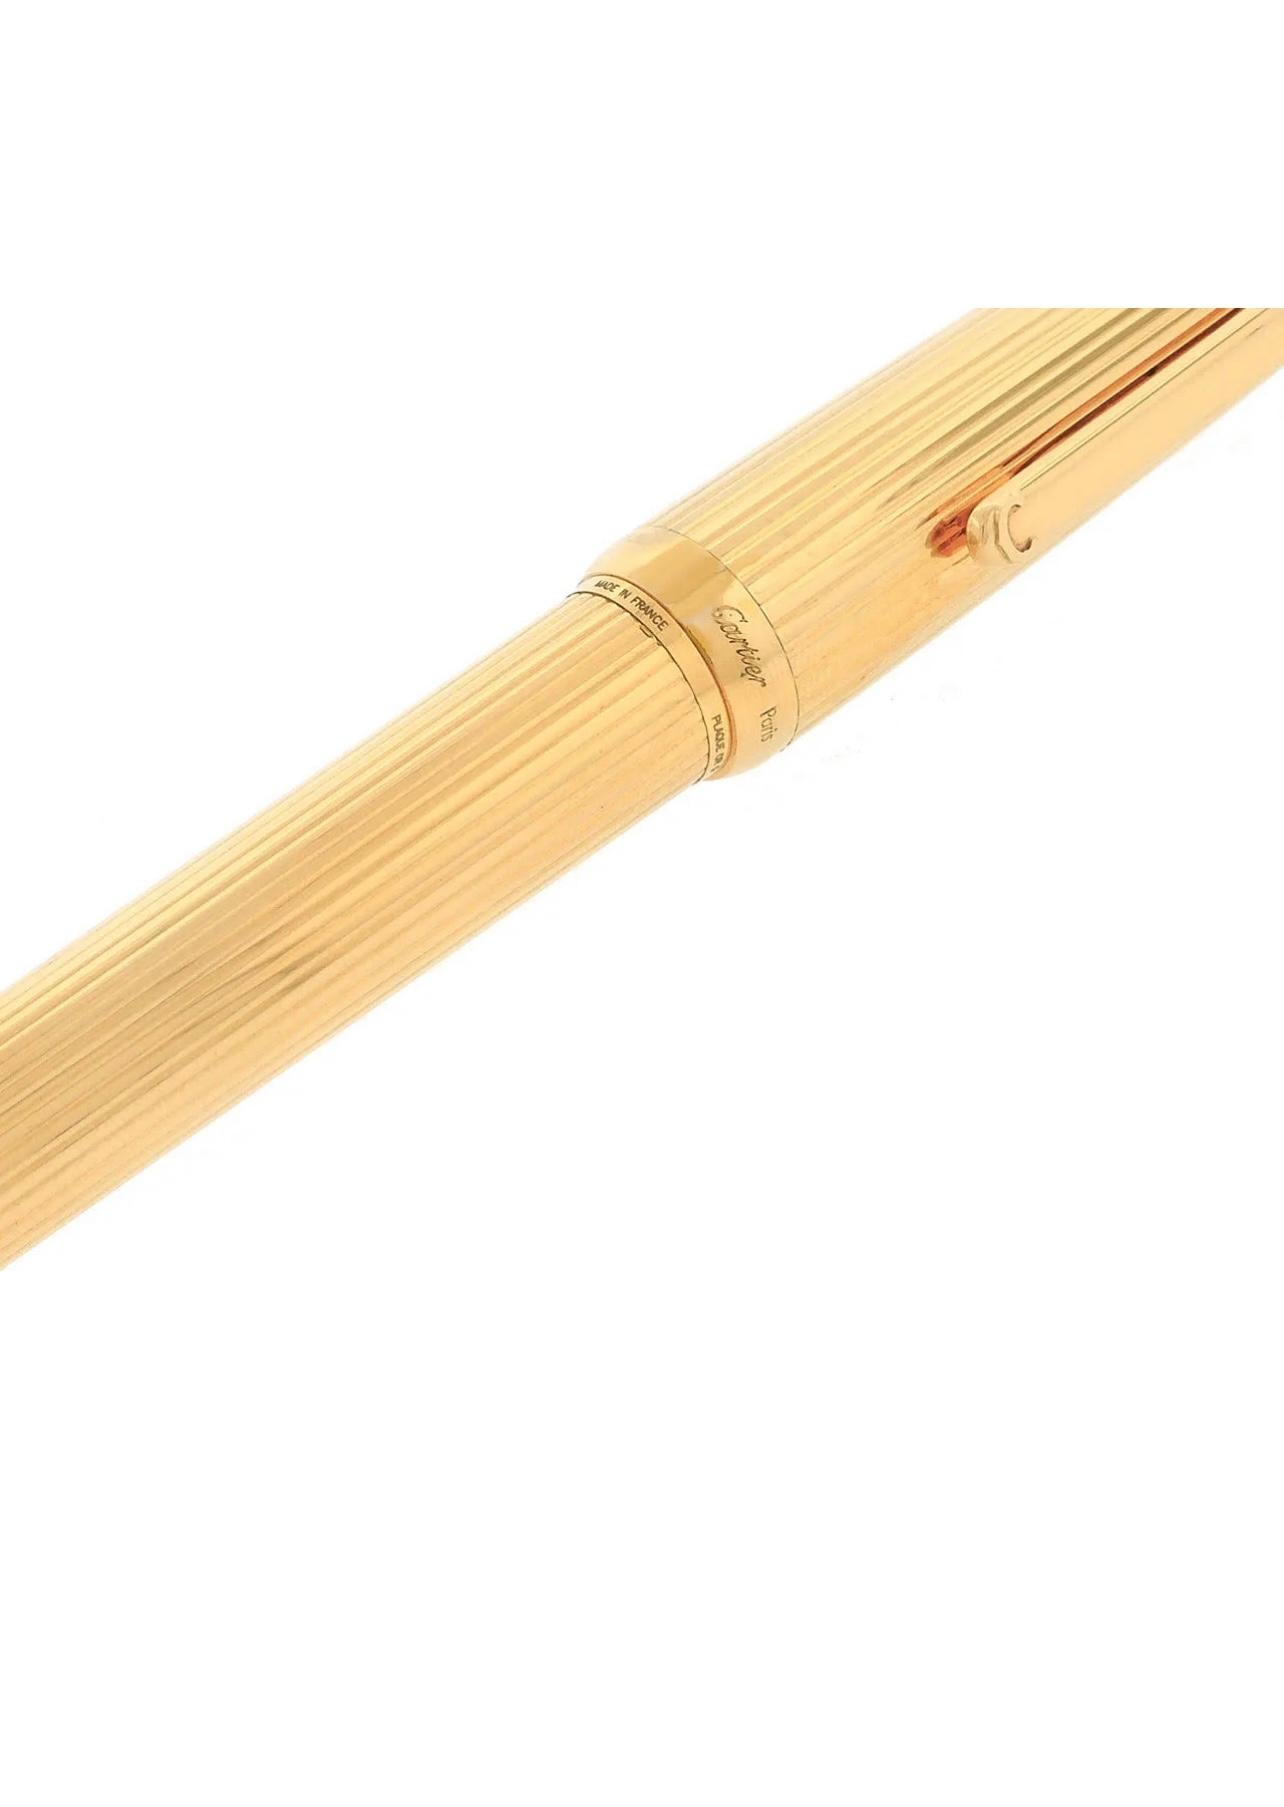 Women's or Men's 012360 Cartier 'Louis Cartier' Fountain Pen in Gold Plate with Cover, 56.4 Gm.